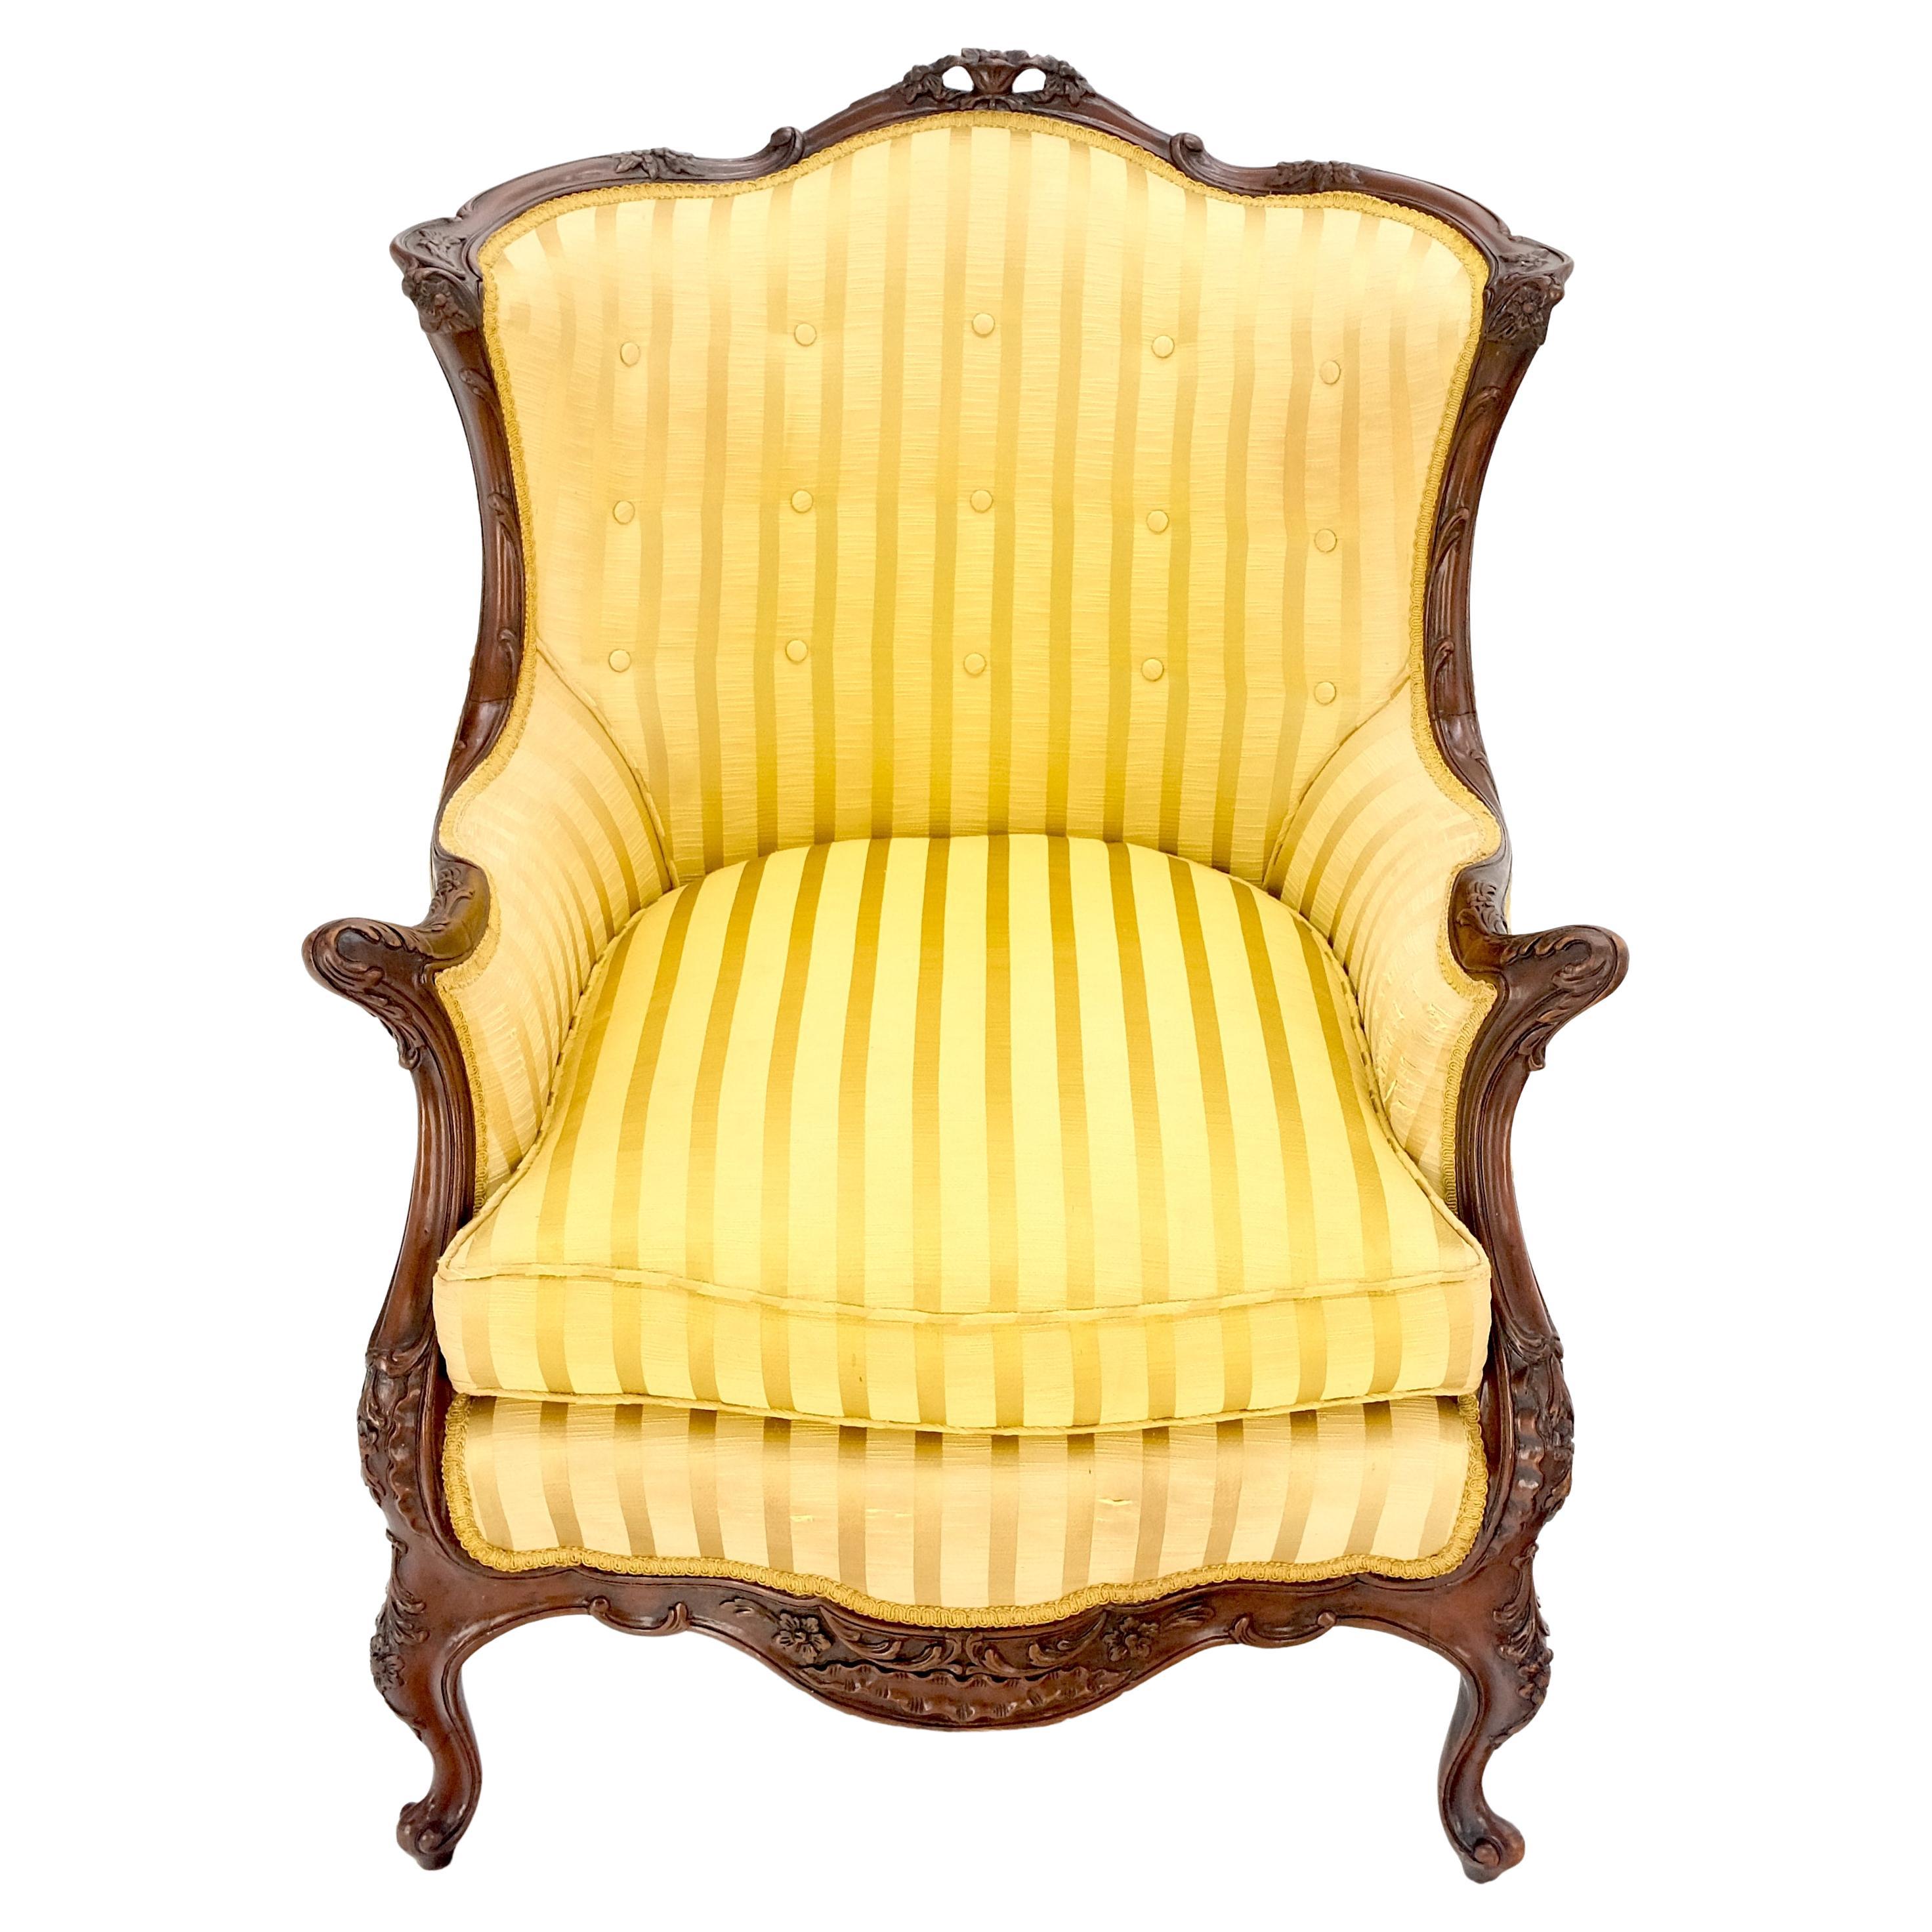 Striped Gold Upholstery Fine Deep Carved Mahogany Frame Lounge Chair Solid Frame.
Upholstery is in Slightly as is condition as pictured.